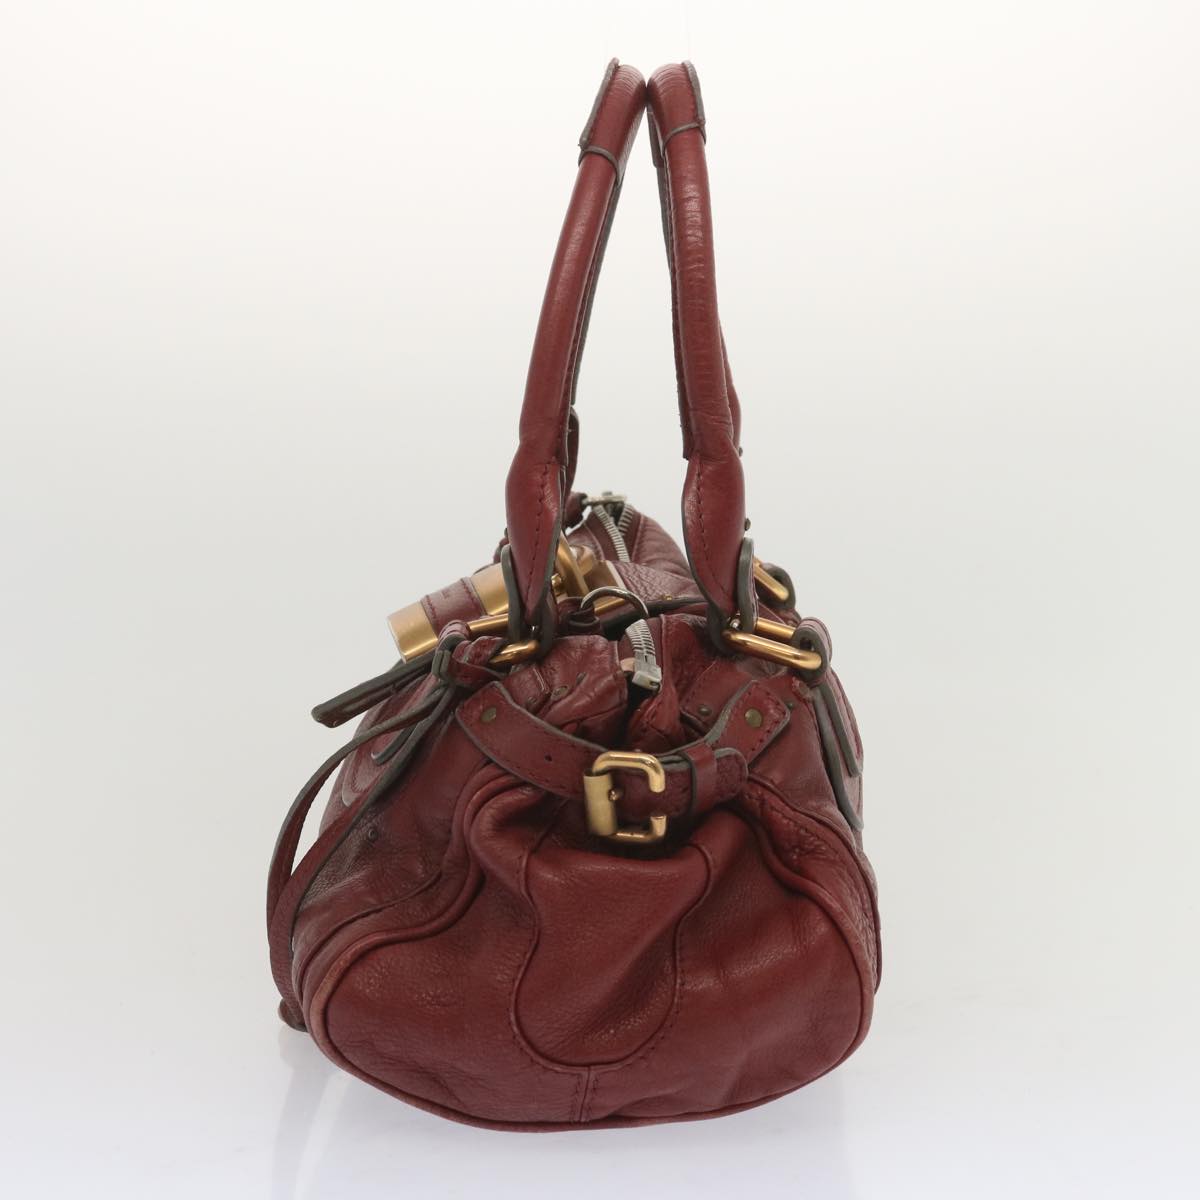 Chloe Hand Bag Leather Red 03 05 53 Auth 61485